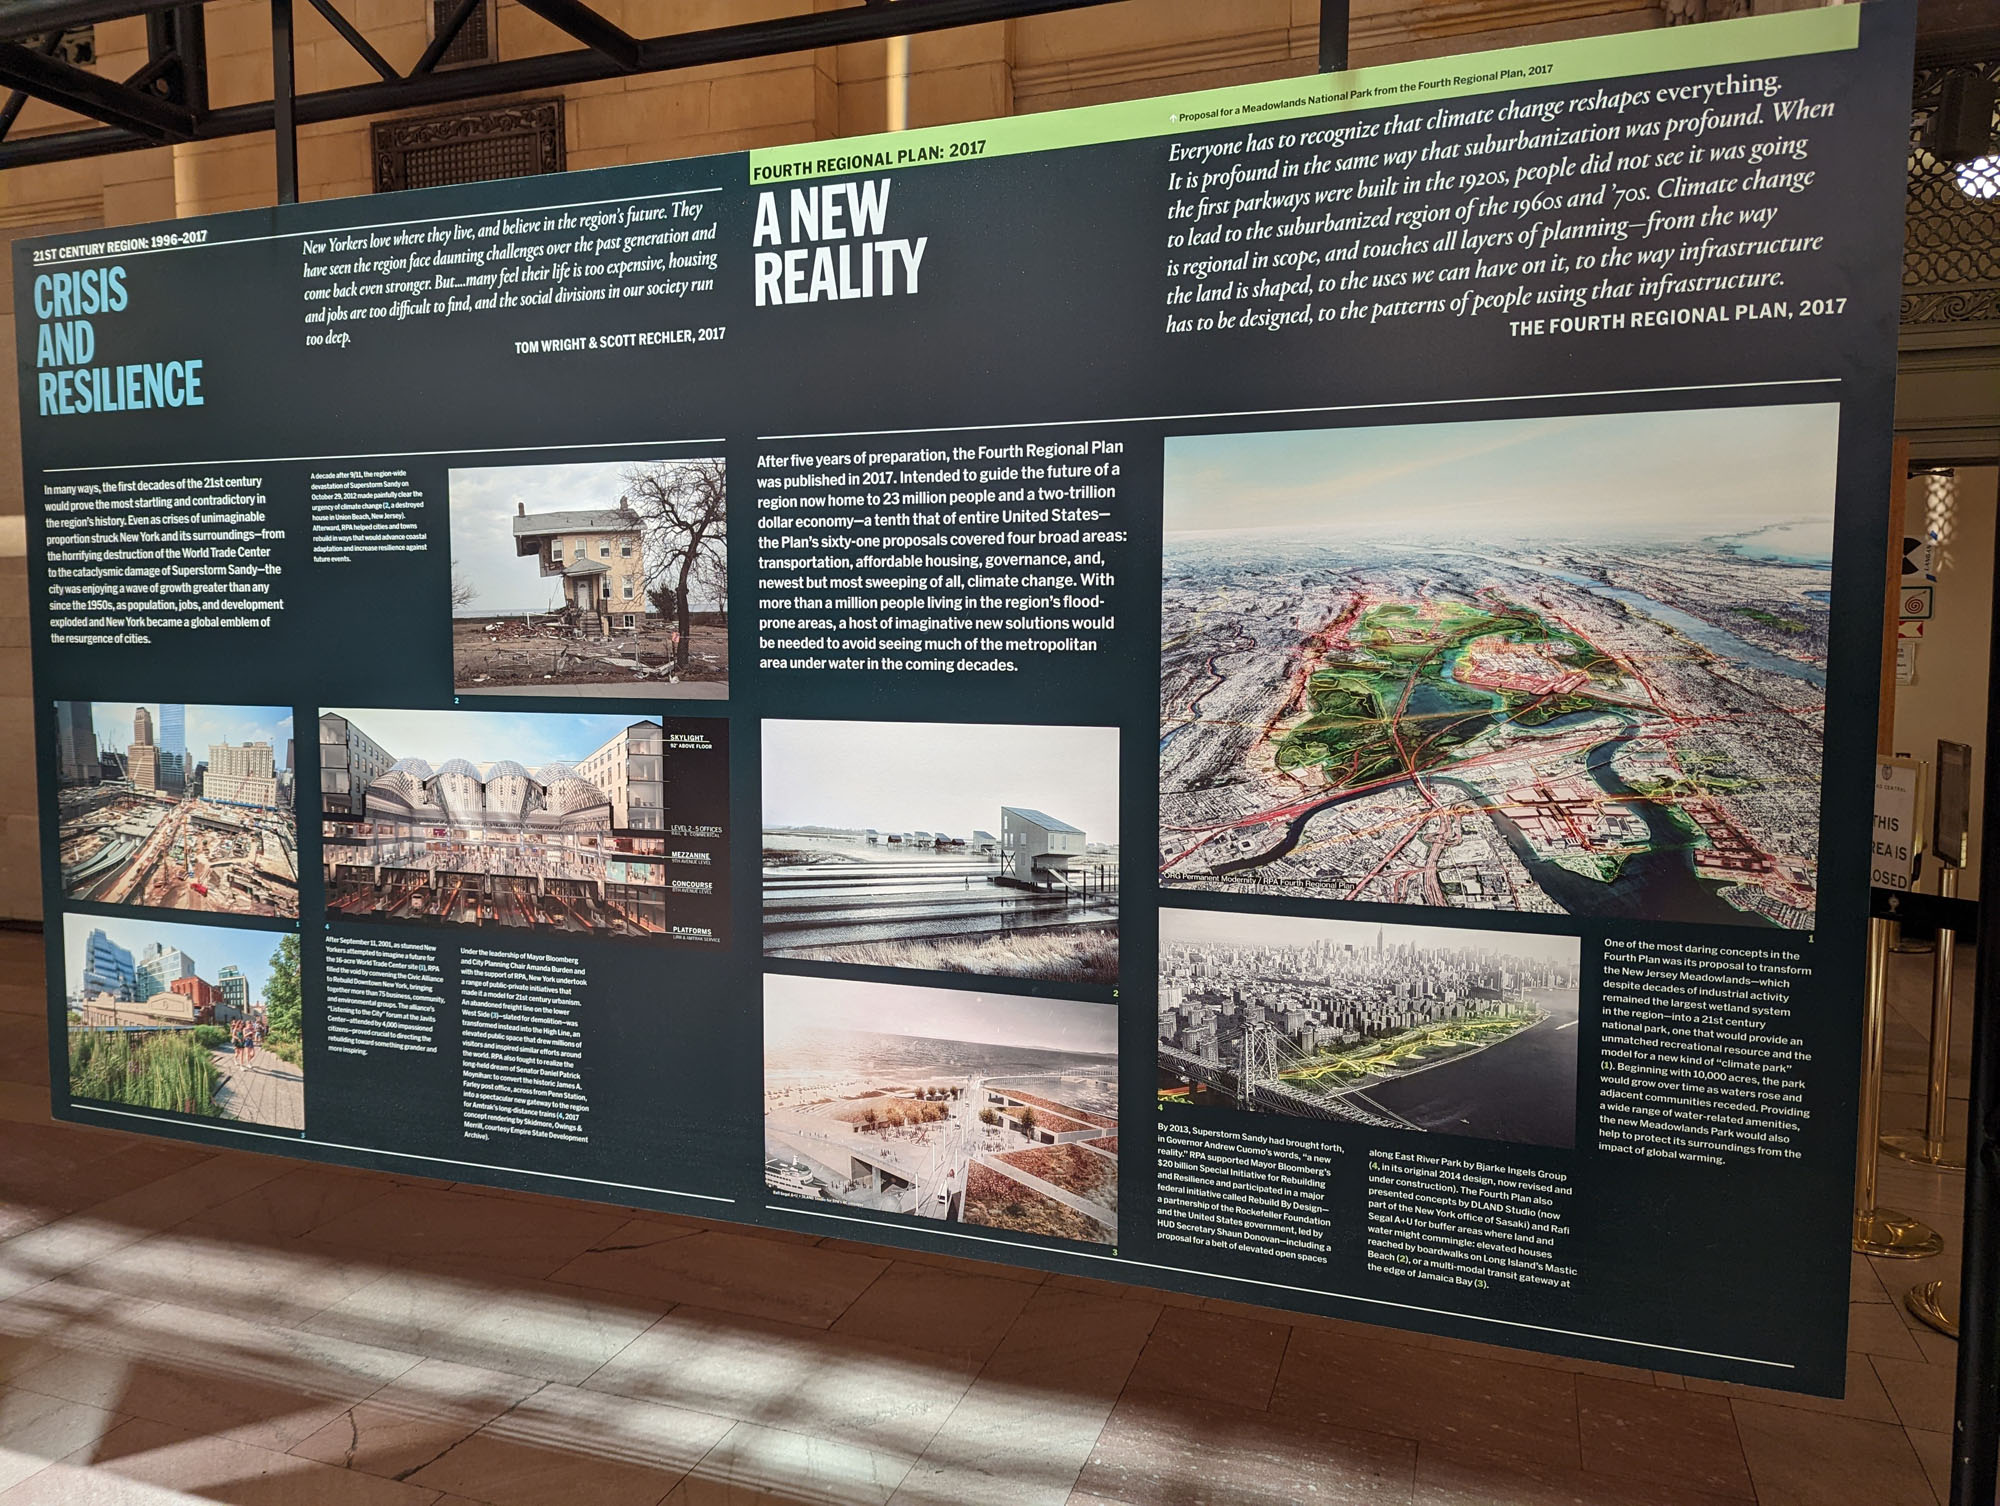  Images from the 2017 regional plan on a poster at an exhibition inside Grand Central Terminal